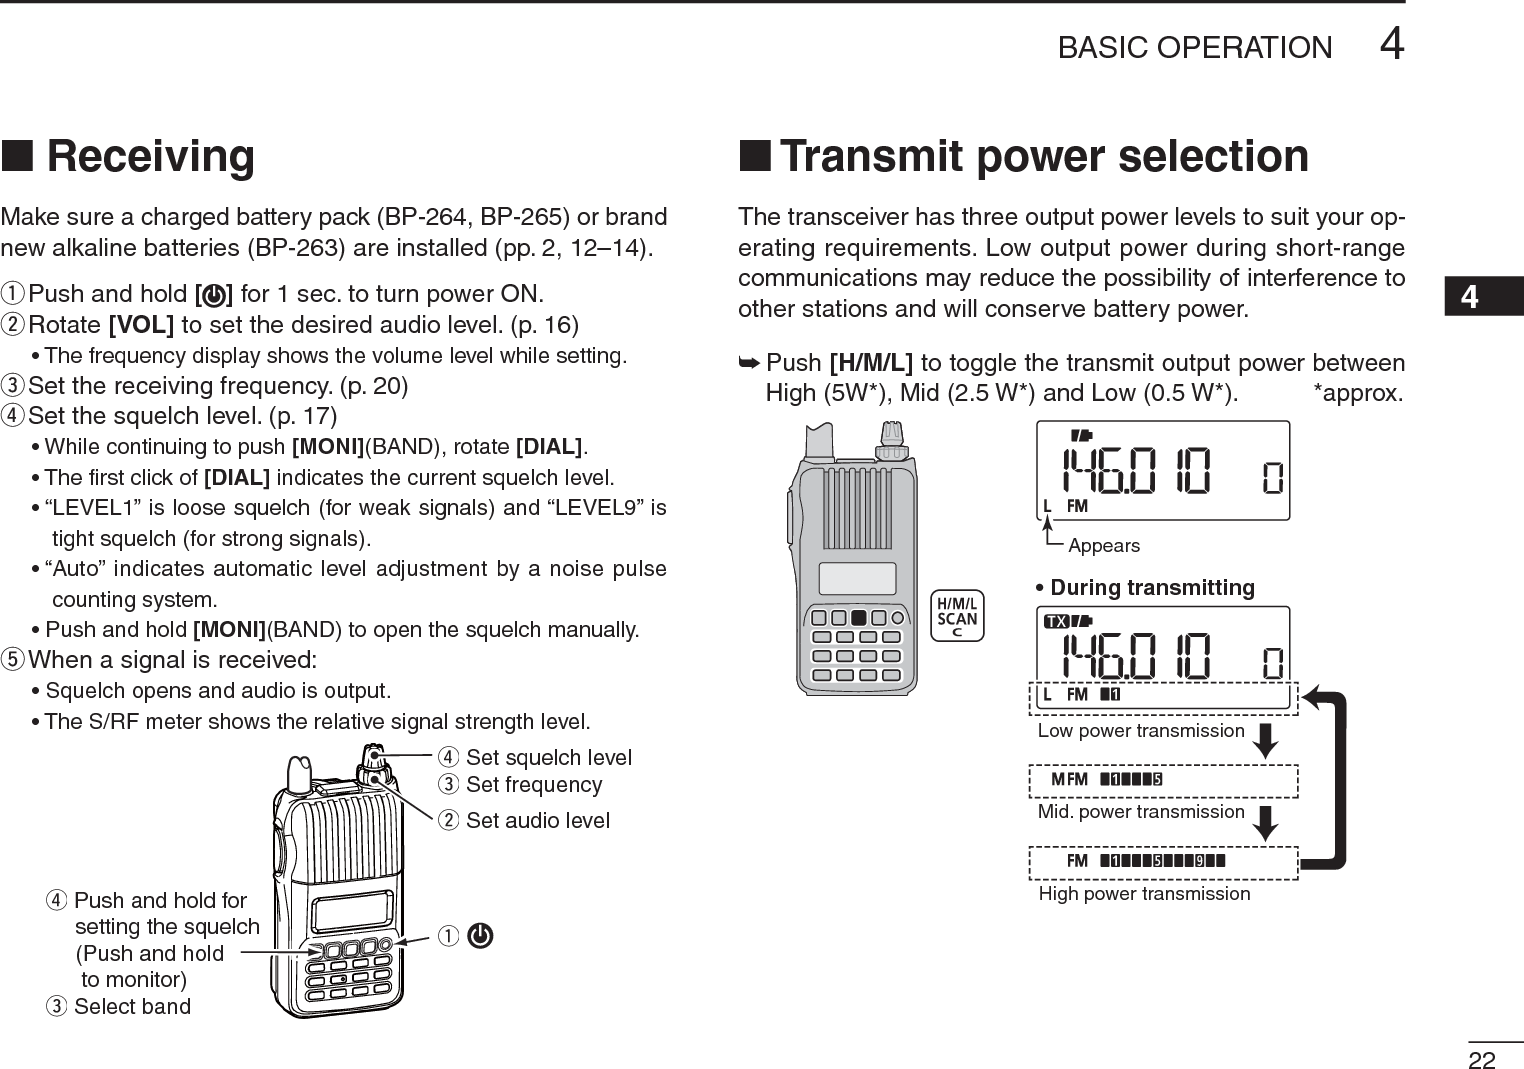 224BASIC OPERATION12345678910111213141516171819N ReceivingMake sure a charged battery pack (BP-264, BP-265) or brand new alkaline batteries (BP-263) are installed (pp. 2, 12–14).qPush and hold [] for 1 sec. to turn power ON.w  Rotate [VOL] to set the desired audio level. (p. 16)• The frequency display shows the volume level while setting.eSet the receiving frequency. (p. 20)rSet the squelch level. (p. 17)• While continuing to push [MONI](BAND), rotate [DIAL].• The ﬁrst click of [DIAL] indicates the current squelch level.• “LEVEL1” is loose squelch (for weak signals) and “LEVEL9” is tight squelch (for strong signals).• “Auto” indicates automatic level adjustment by a noise pulse counting system.• Push and hold [MONI](BAND) to open the squelch manually.t  When a signal is received:• Squelch opens and audio is output.• The S/RF meter shows the relative signal strength level.qr Set squelch levele Set frequencyr Push and hold forsetting the squelch(Push and hold to monitor)e Select bandw Set audio levelN Transmit power selectionThe transceiver has three output power levels to suit your op-erating requirements. Low output power during short-range communications may reduce the possibility of interference to other stations and will conserve battery power.±  Push [H/M/L] to toggle the transmit output power between High (5W*), Mid (2.5 W*) and Low (0.5 W*).           *approx.AppearsLow power transmissionMid. power transmissionHigh power transmission• During transmitting